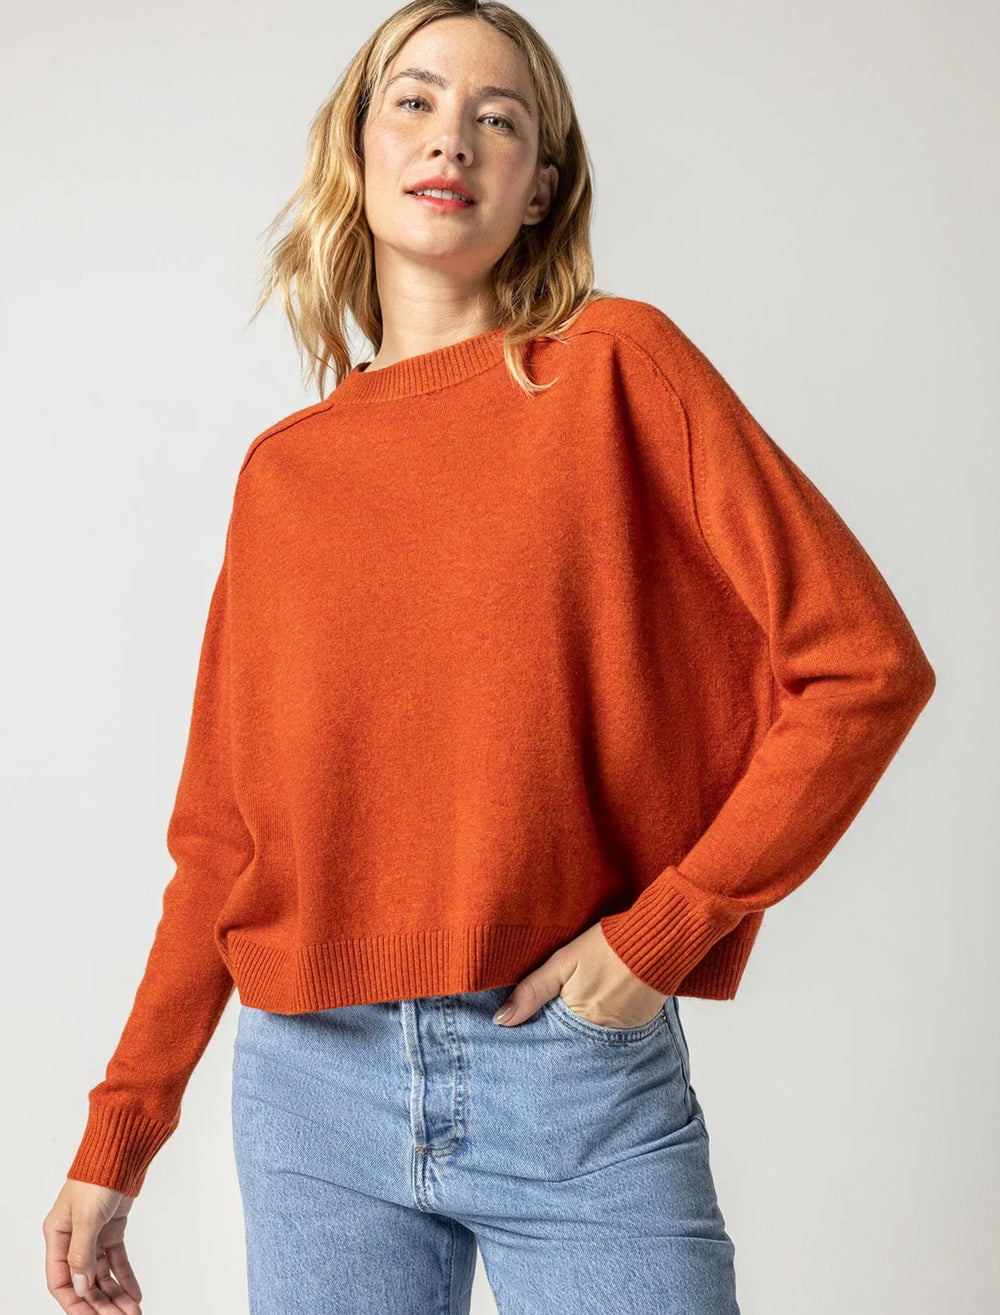 Model wearing Lilla P.'s oversized saddle sleeve sweater in spice.